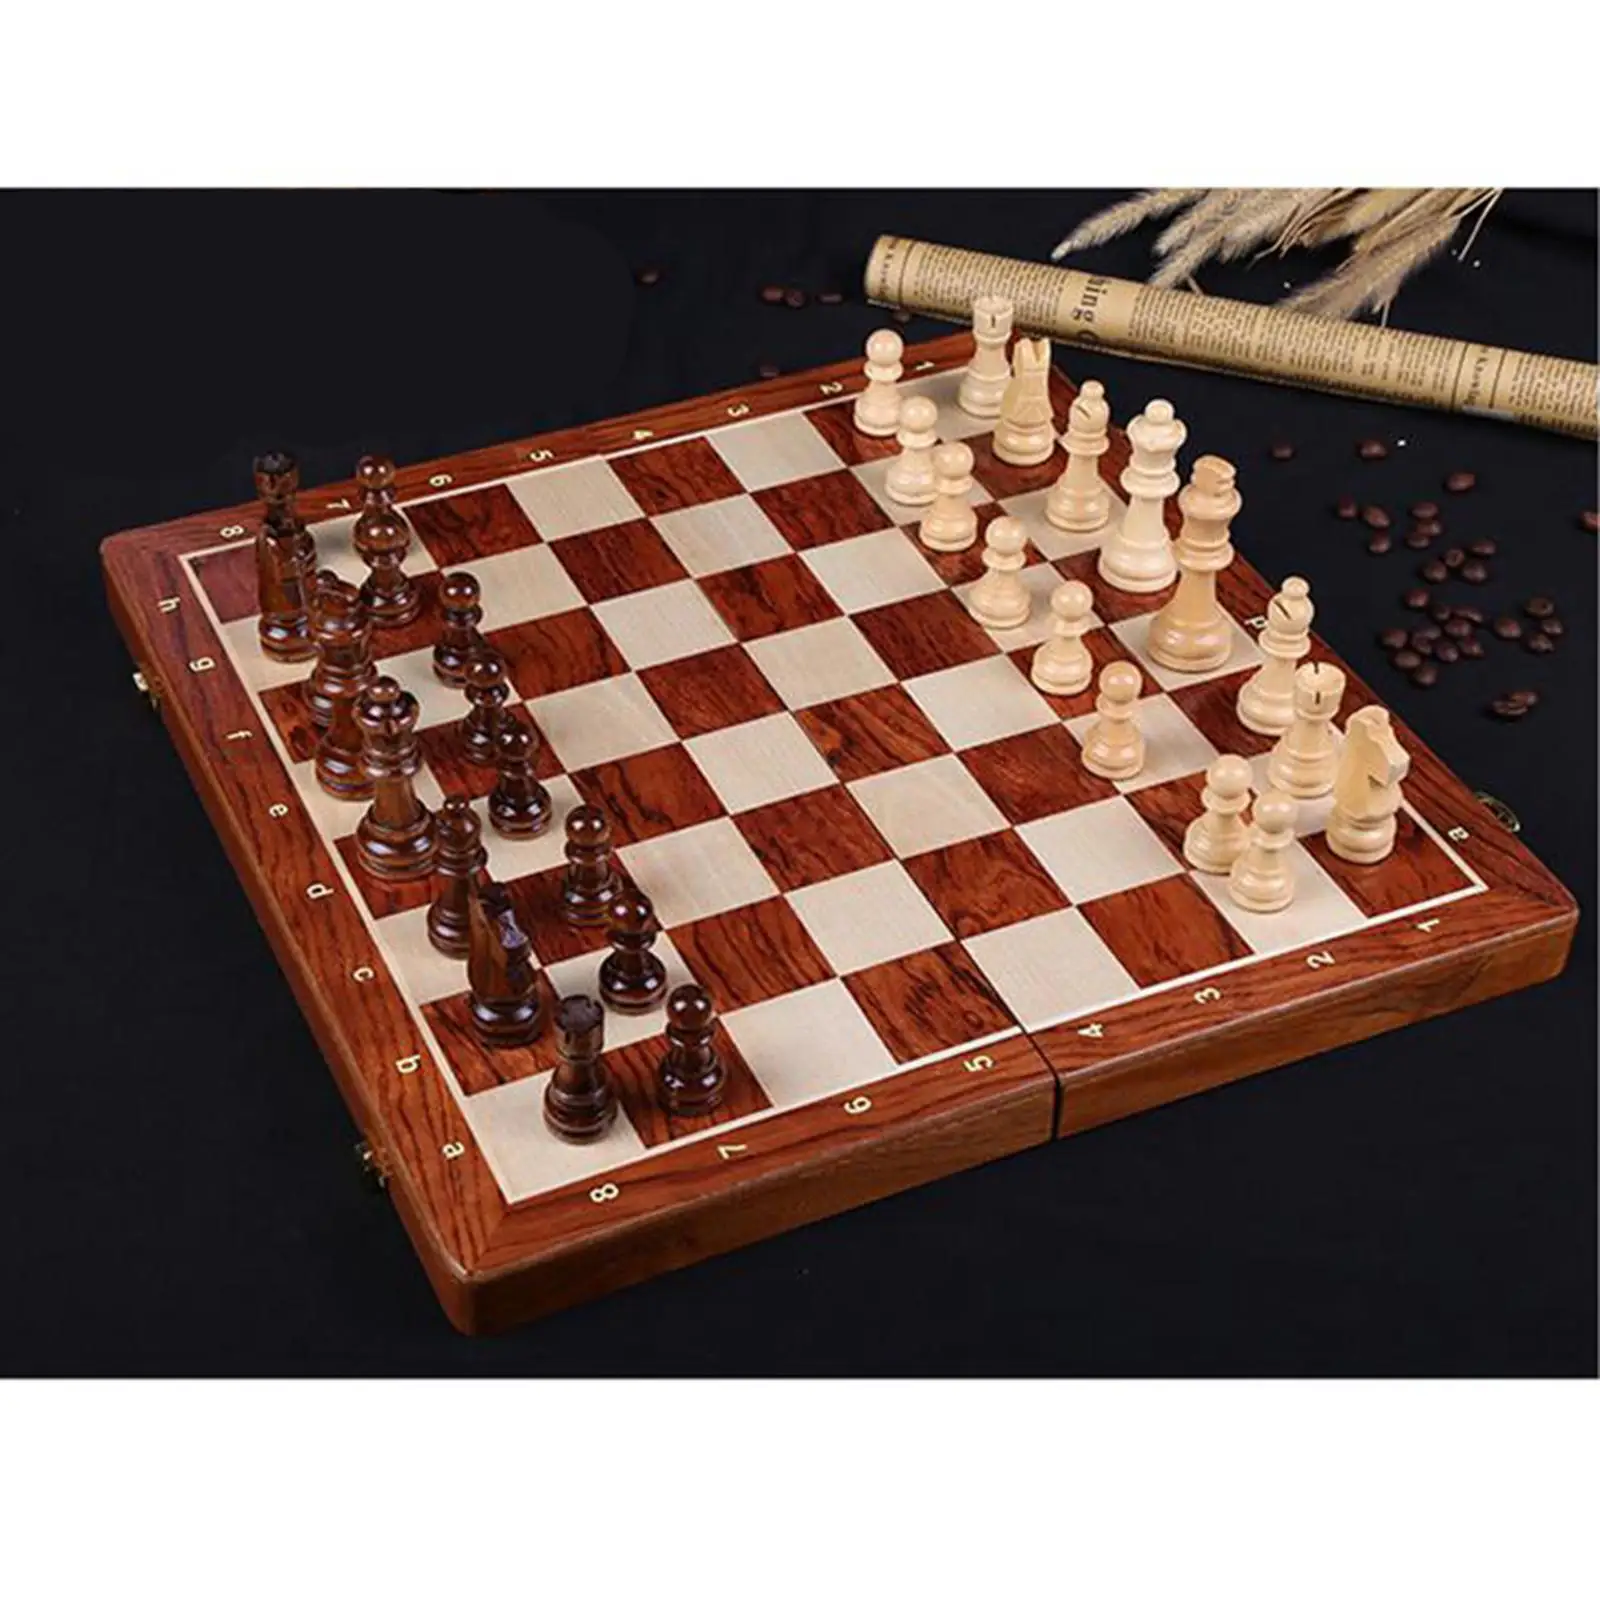 Professional 39x39cm Wooden Carved Chess Set Board And 32+2 Pieces Chessmen